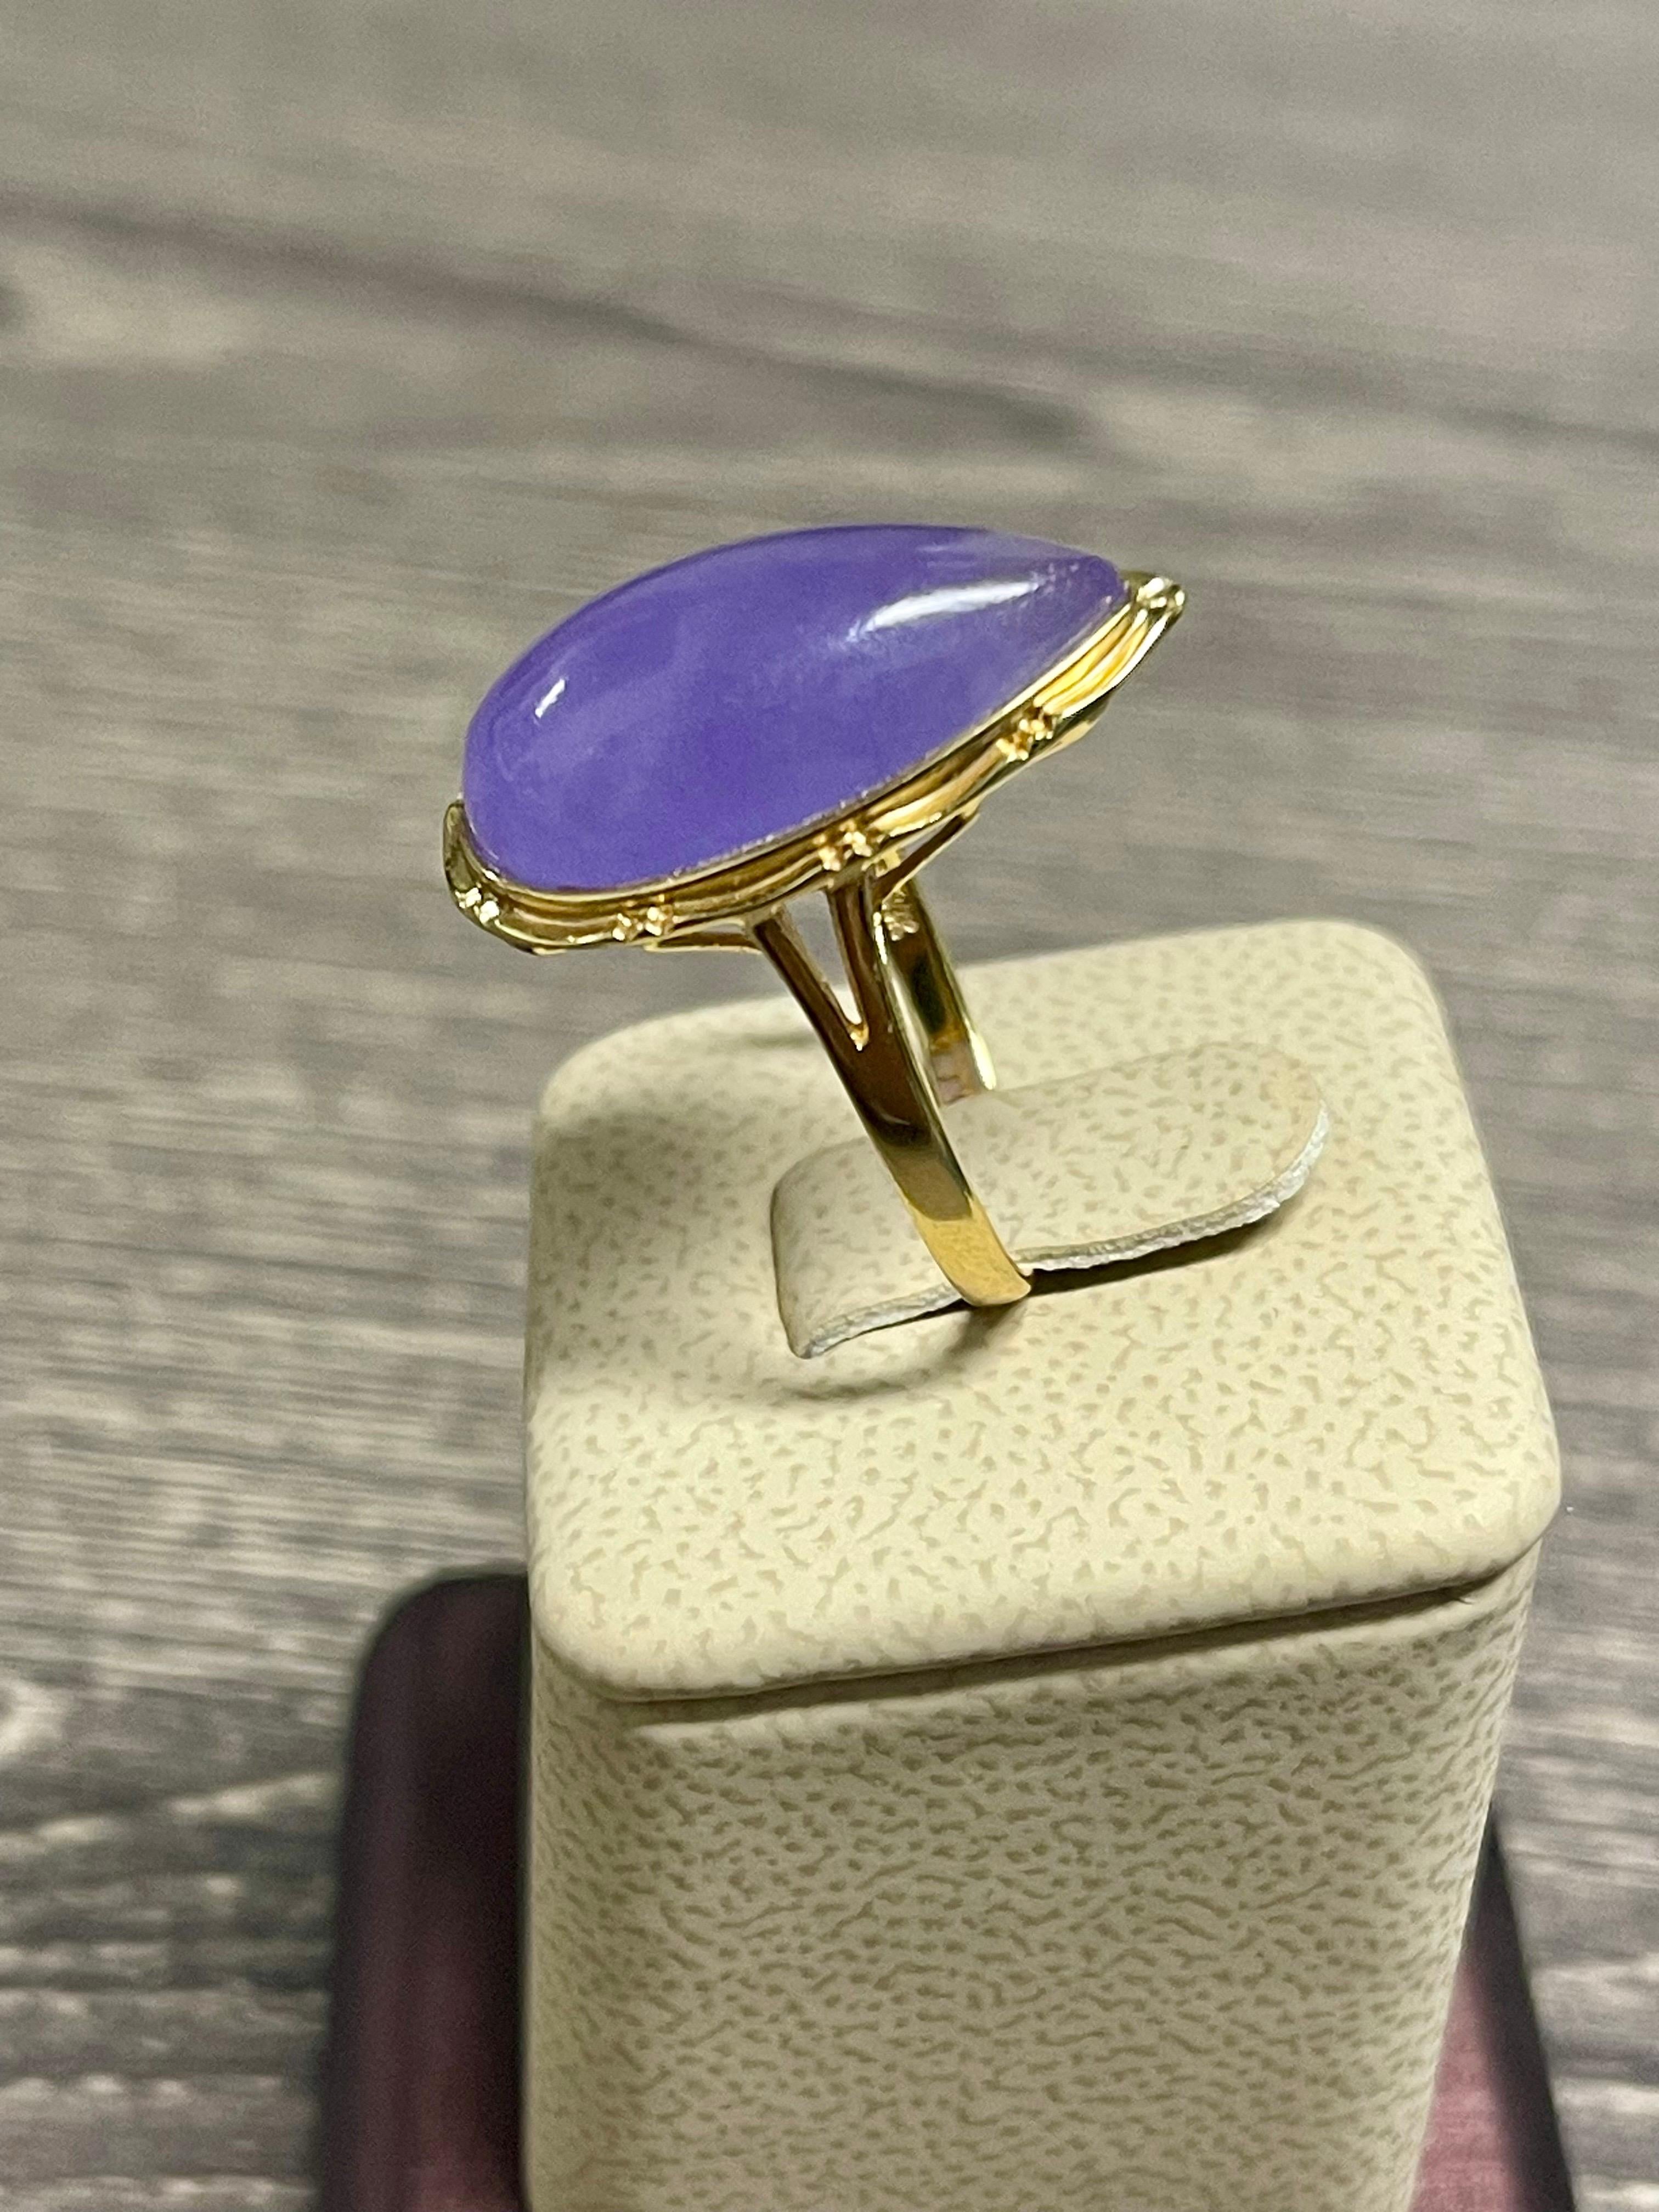 Amazing Pear Shaped Cabochon Amethyst Ring In 14k. Size 8.